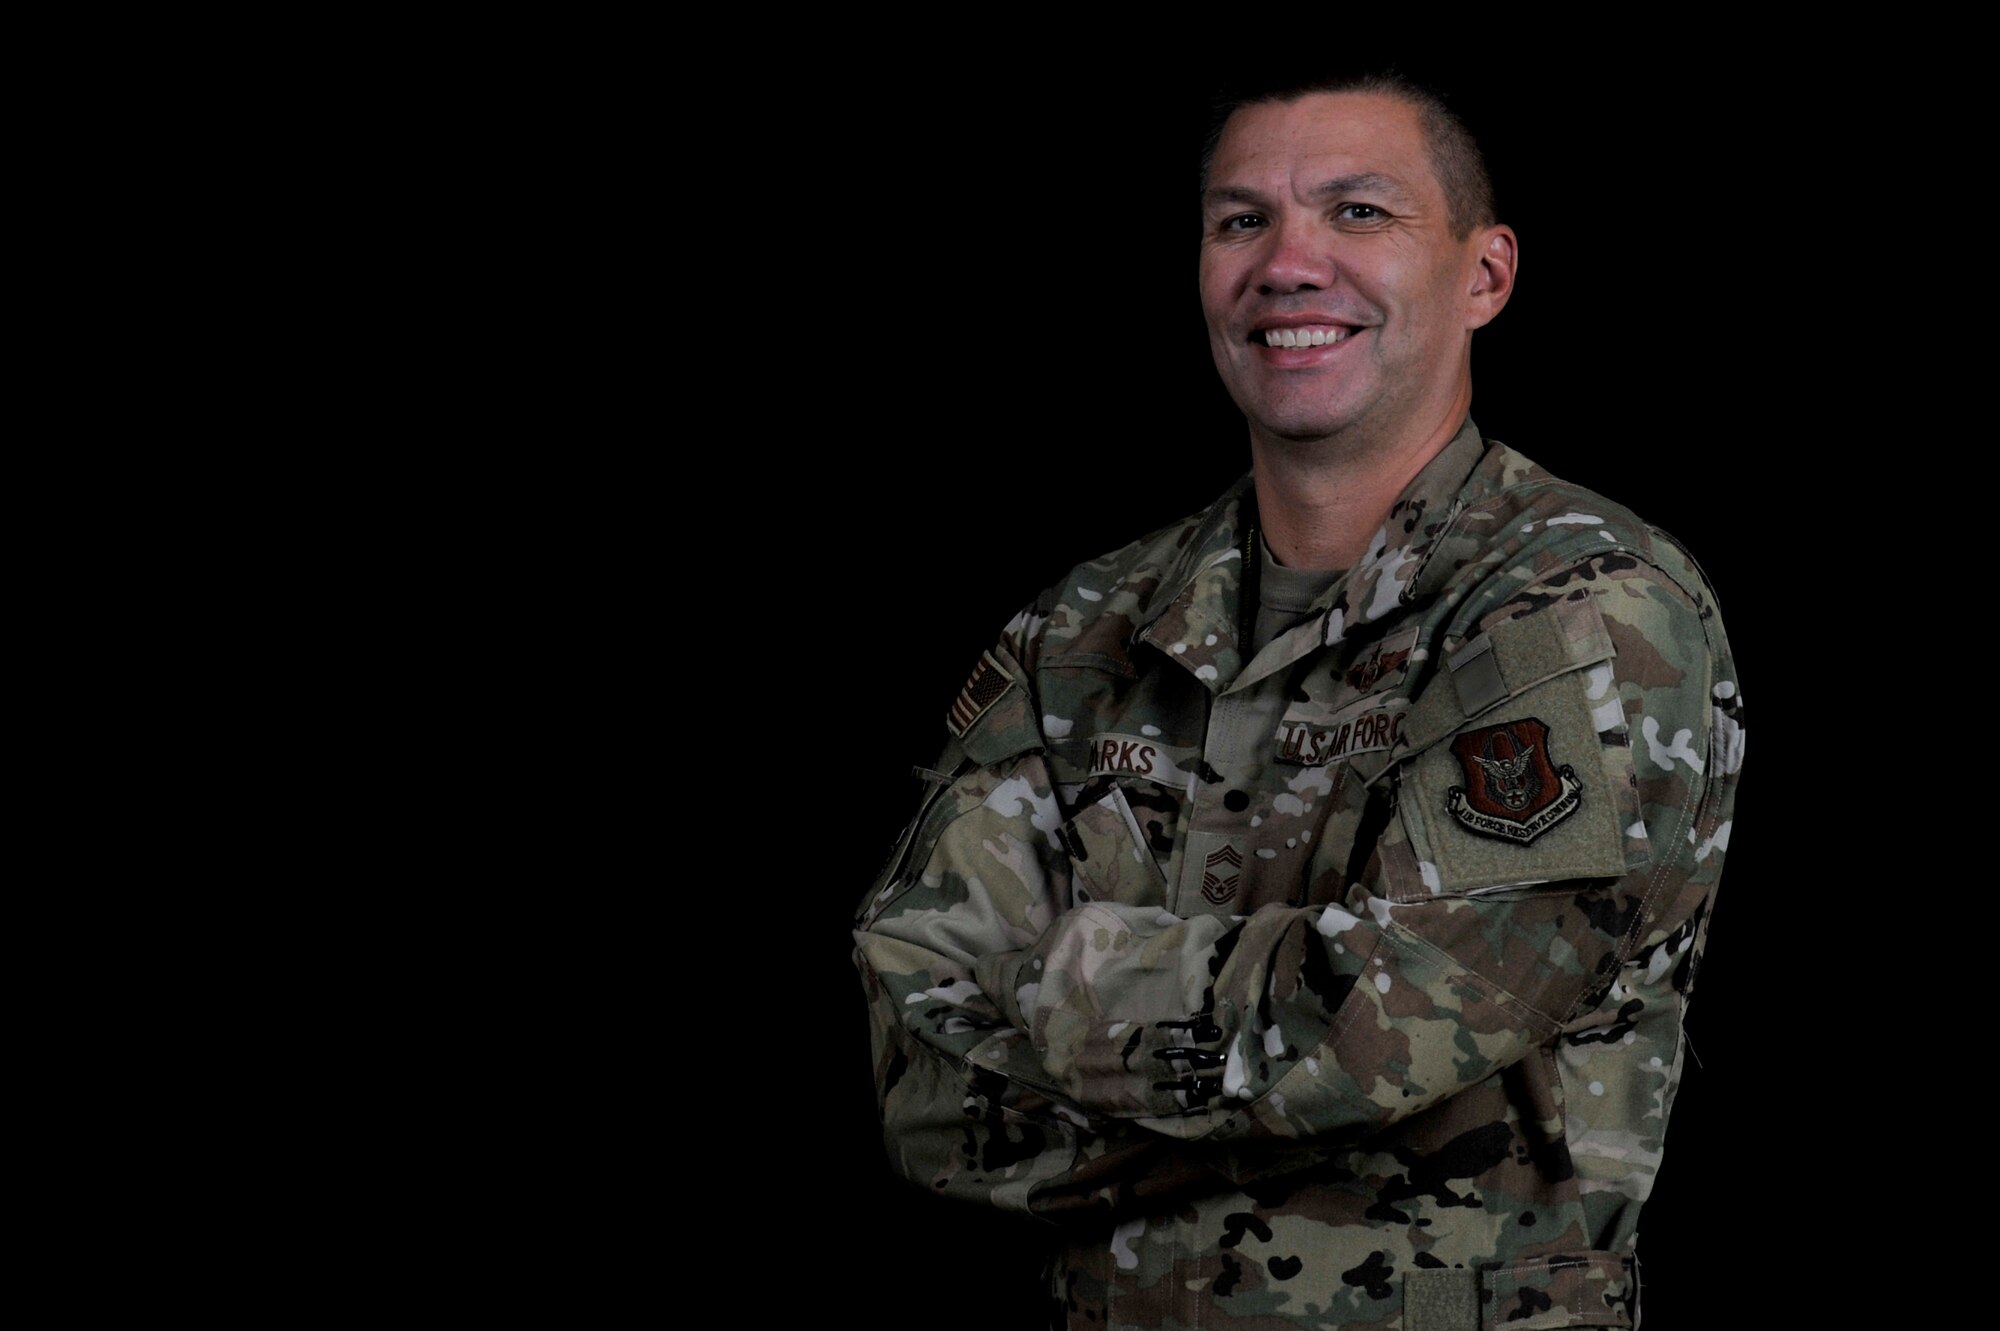 Chief Master Sgt. Nathan Parks, 726th Operations Group Superintendent. (U.S. Air Force photo by Airman 1st Class William Rosado)